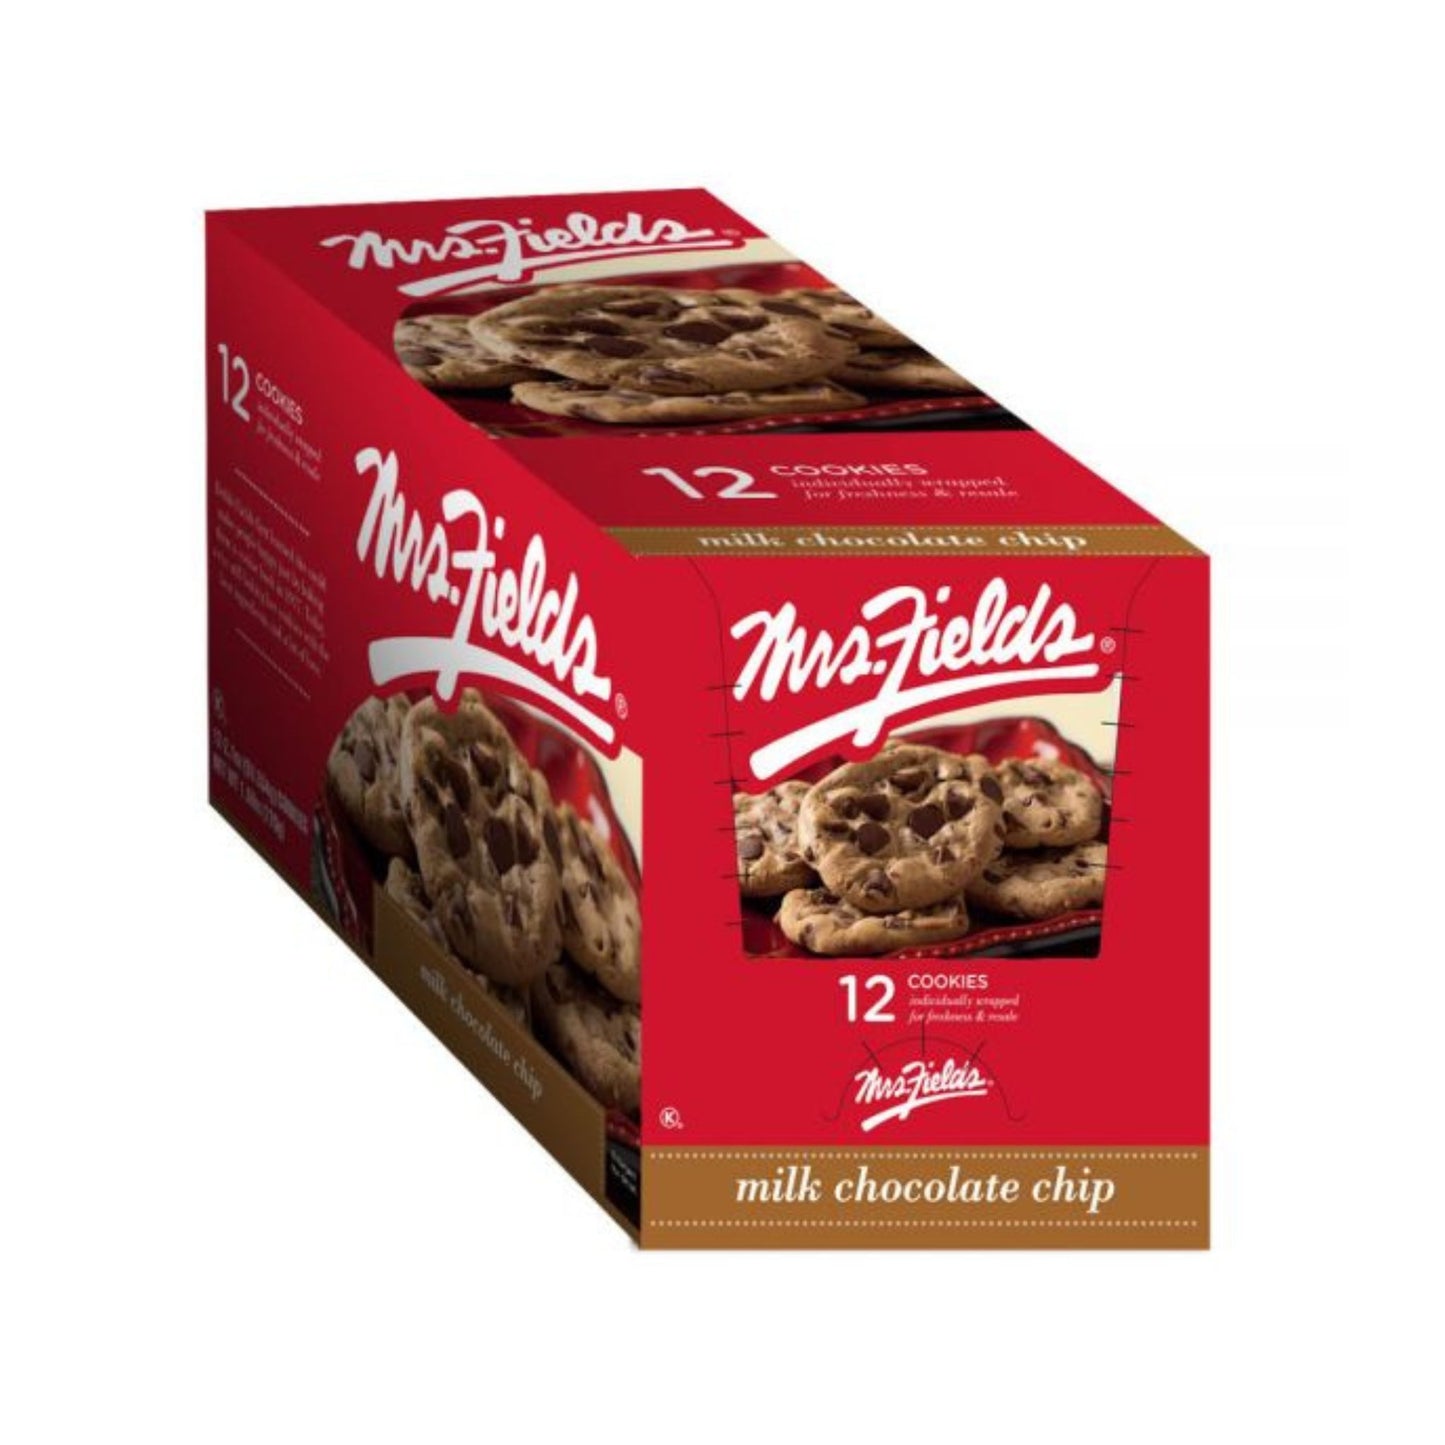 Mrs. Fields Gourmet Chocolate Chip Cookies 2.1 Oz. 12 count in a box